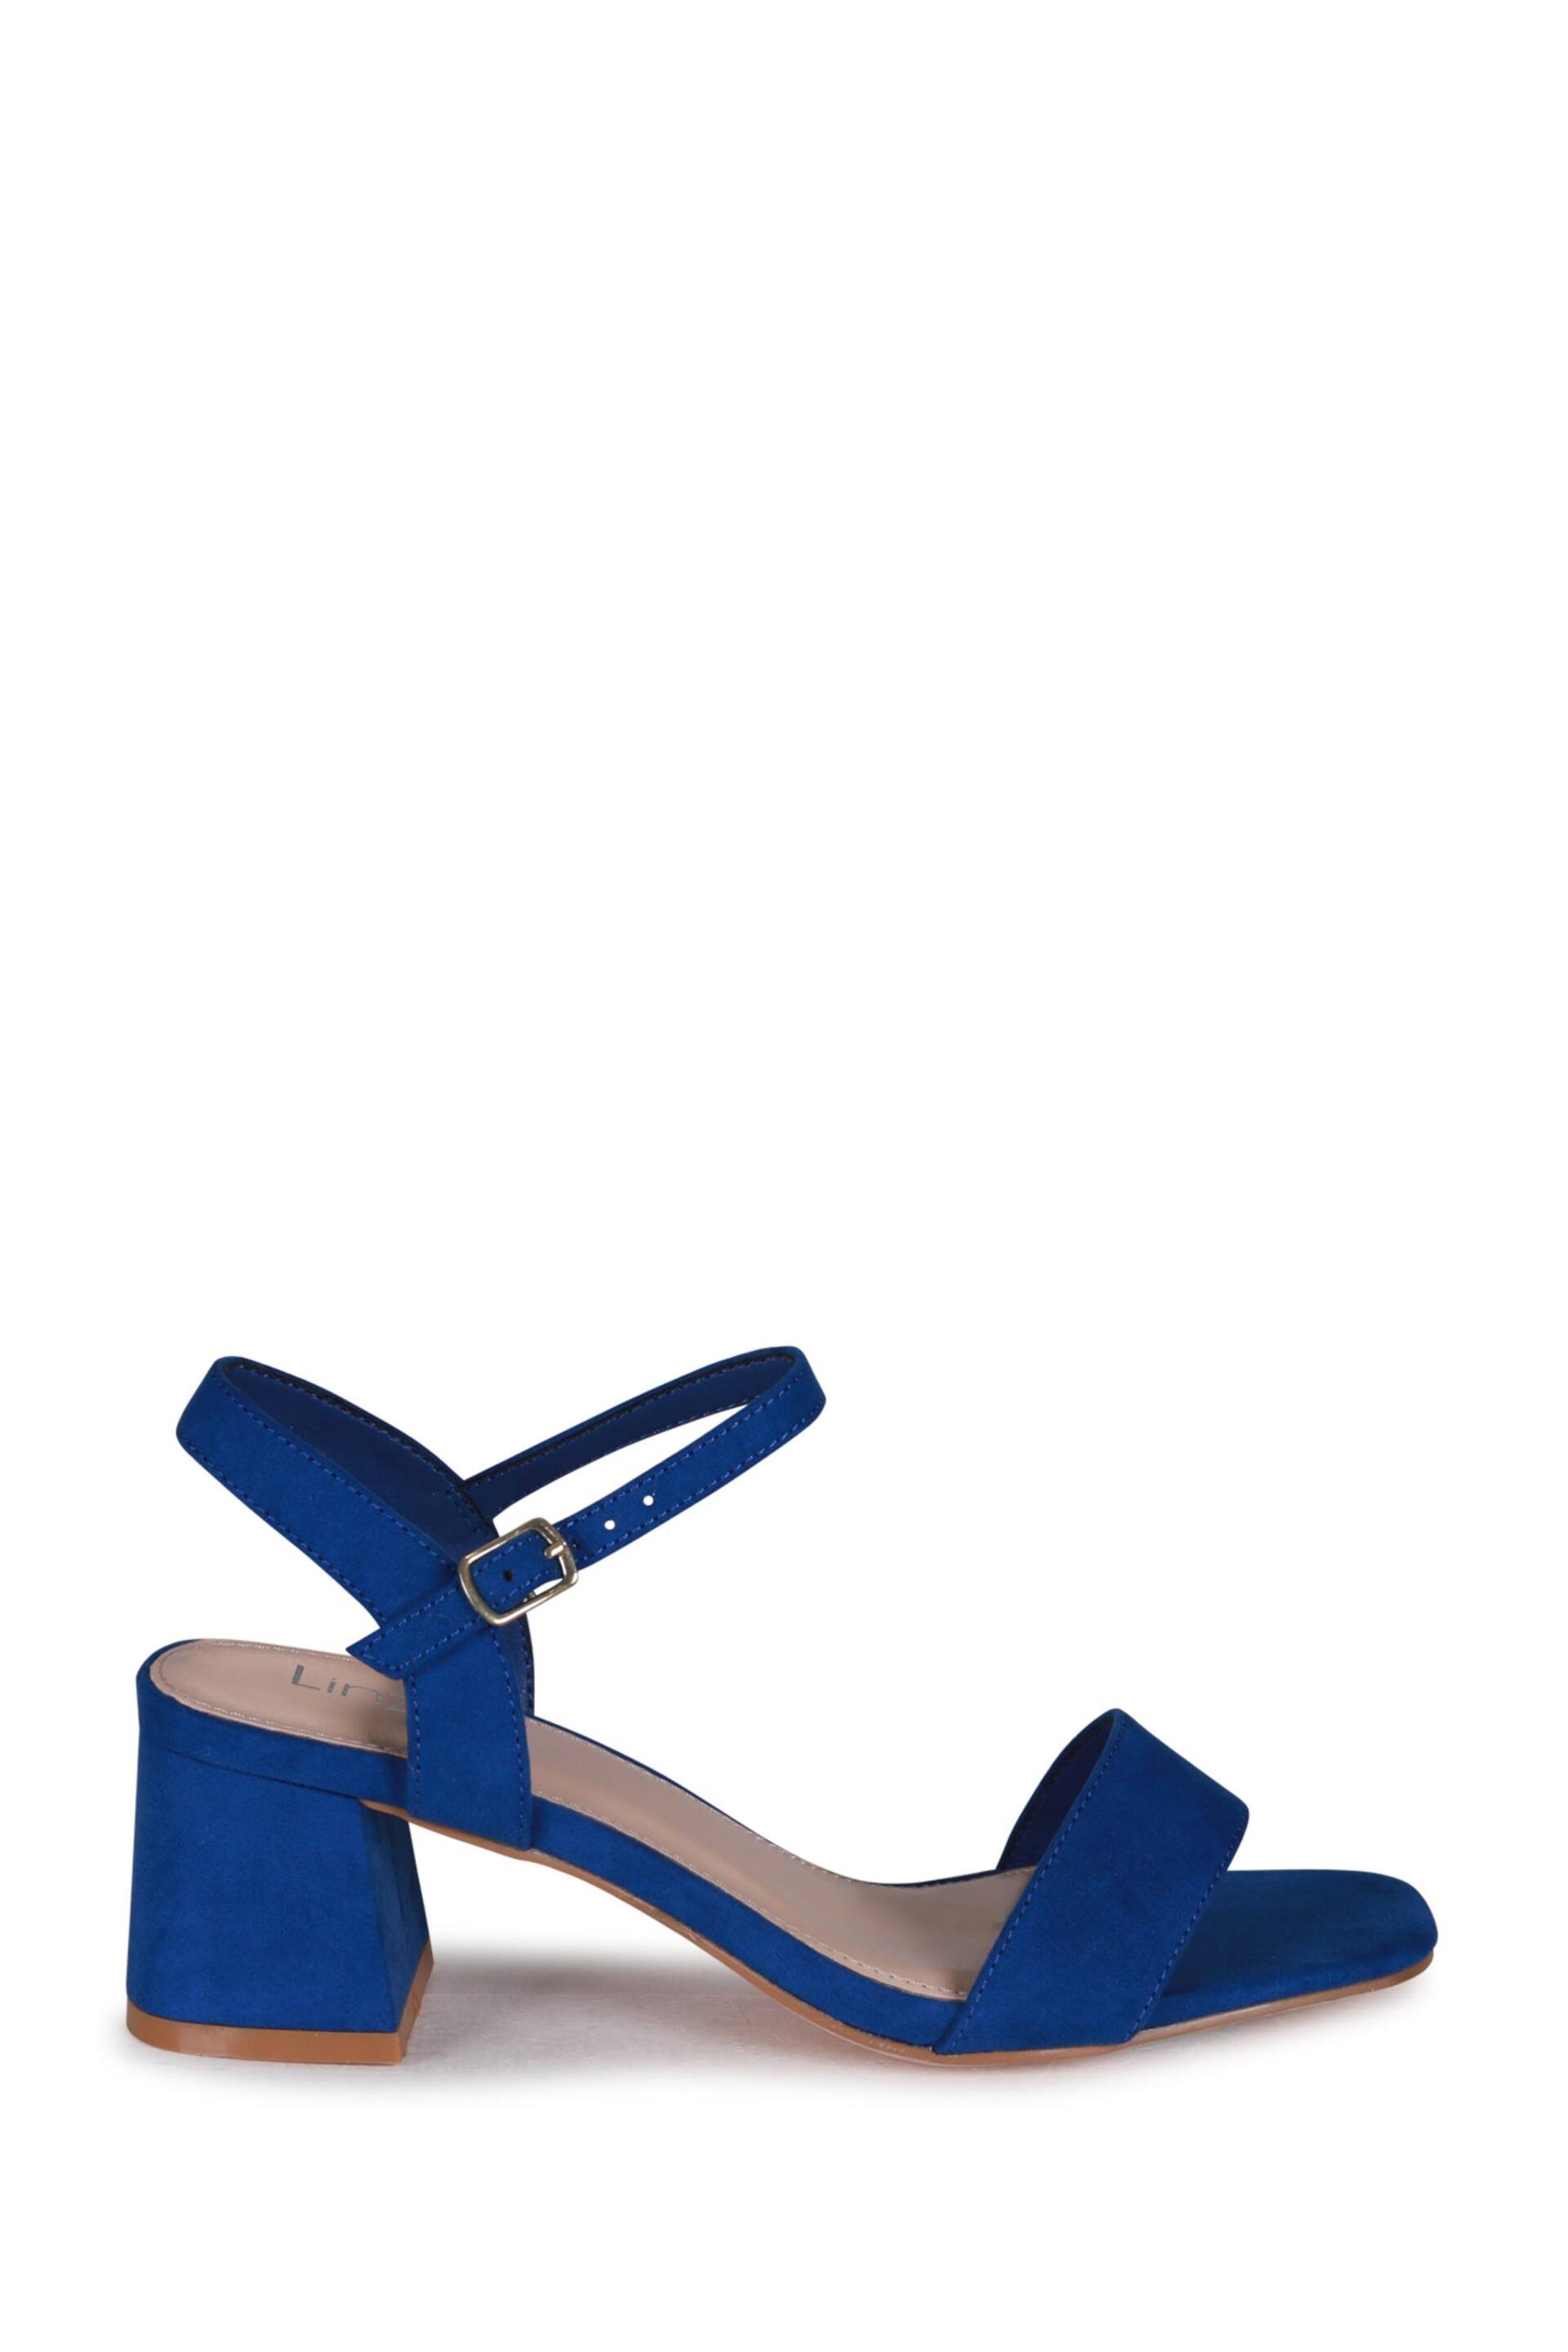 Linzi Cobalt Blue Darcie Barely There Block Heeled Sandals - Image 3 of 9